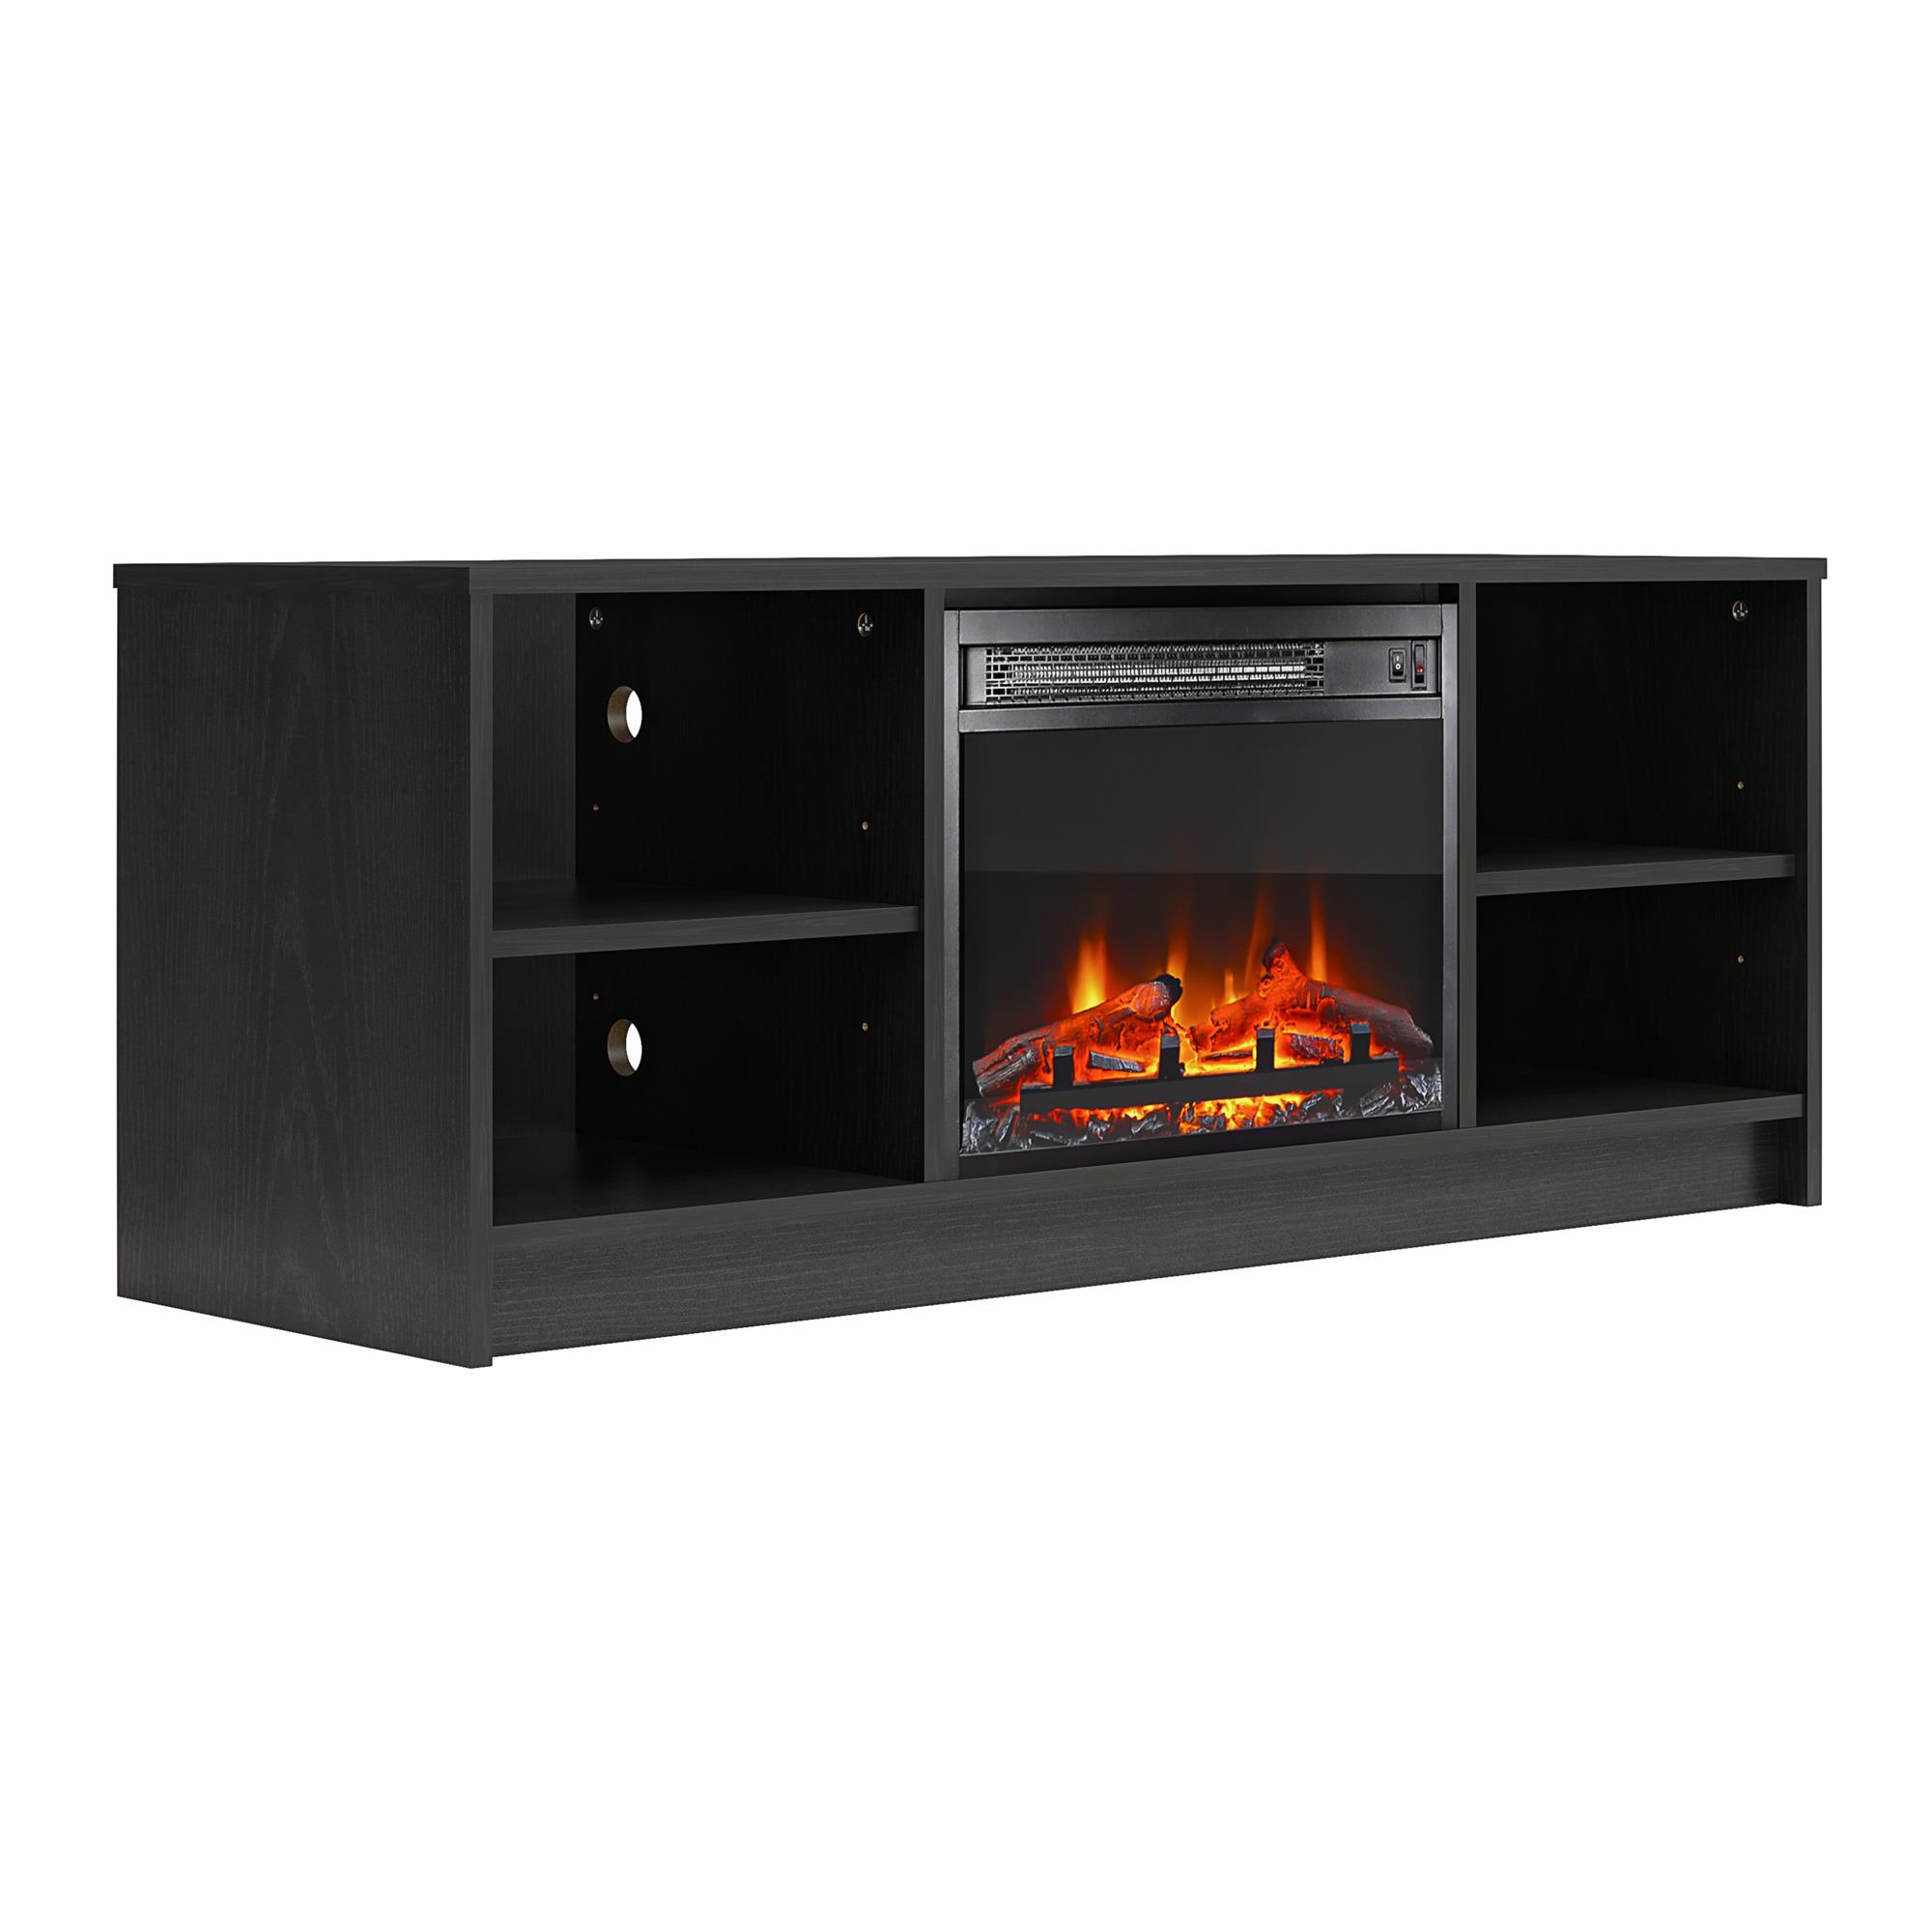 Mainstays Fireplace TV Stand, for TVs up to 55", Black Oak - image 3 of 12